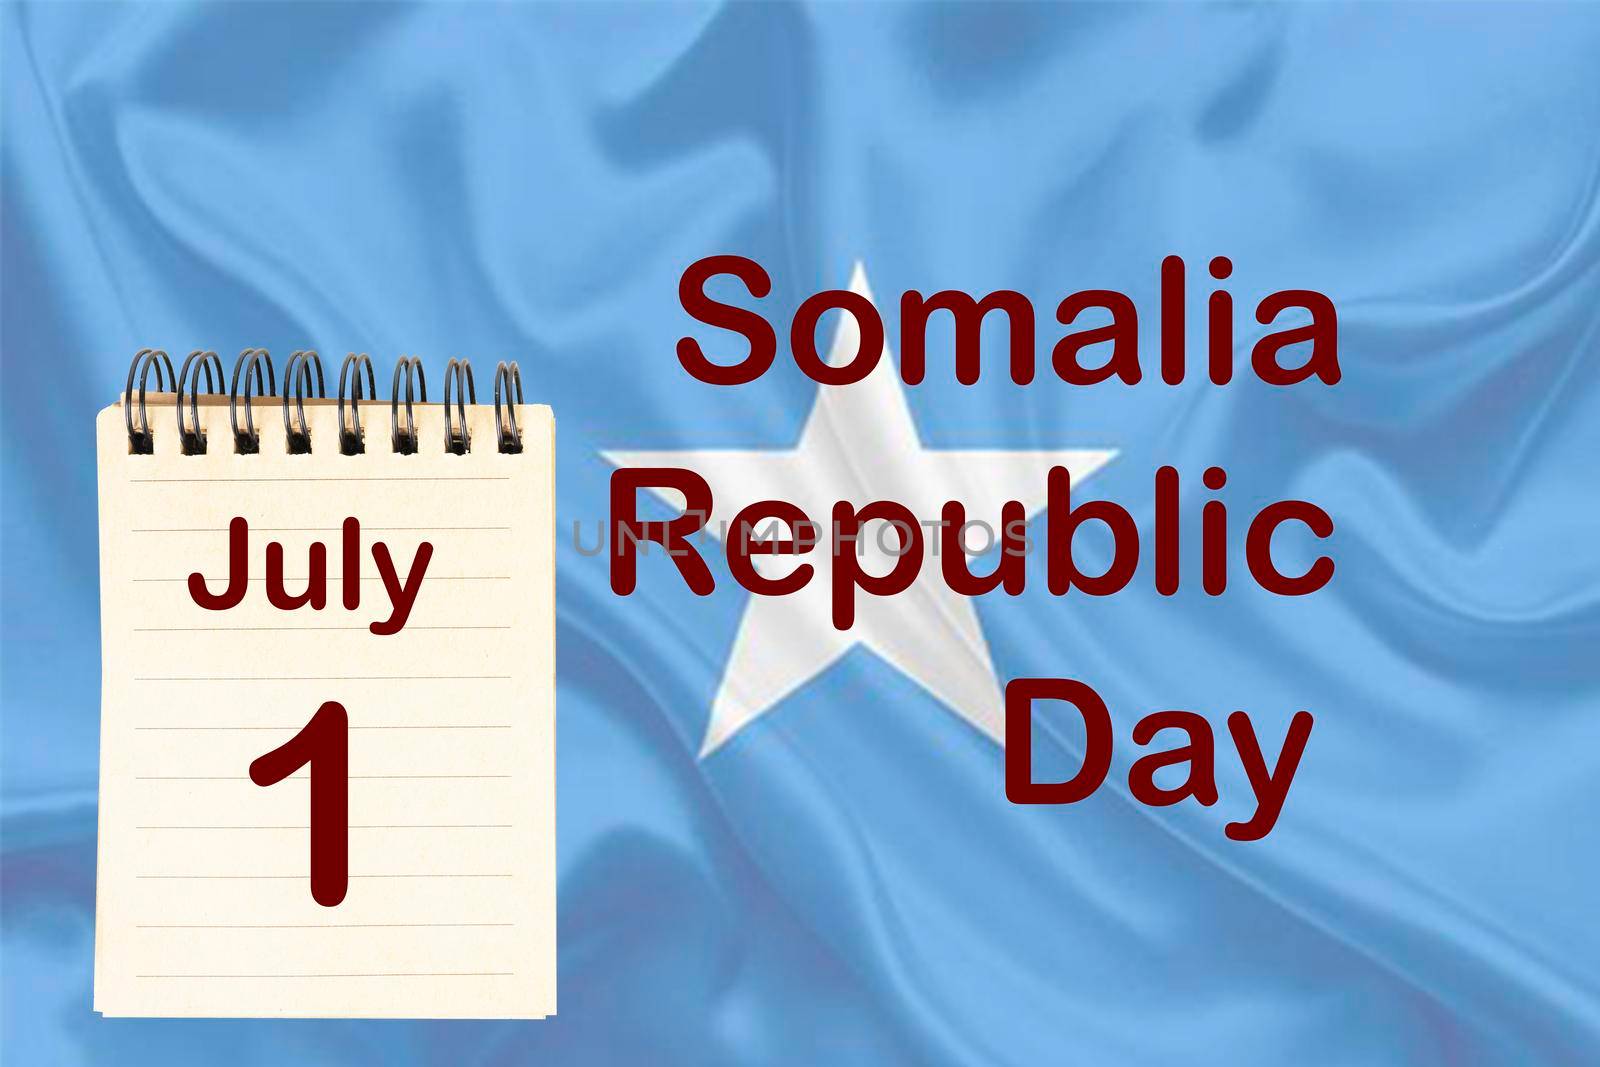 The celebration of the Somalia Republic Day with the flag and the calendar indicating the July 1